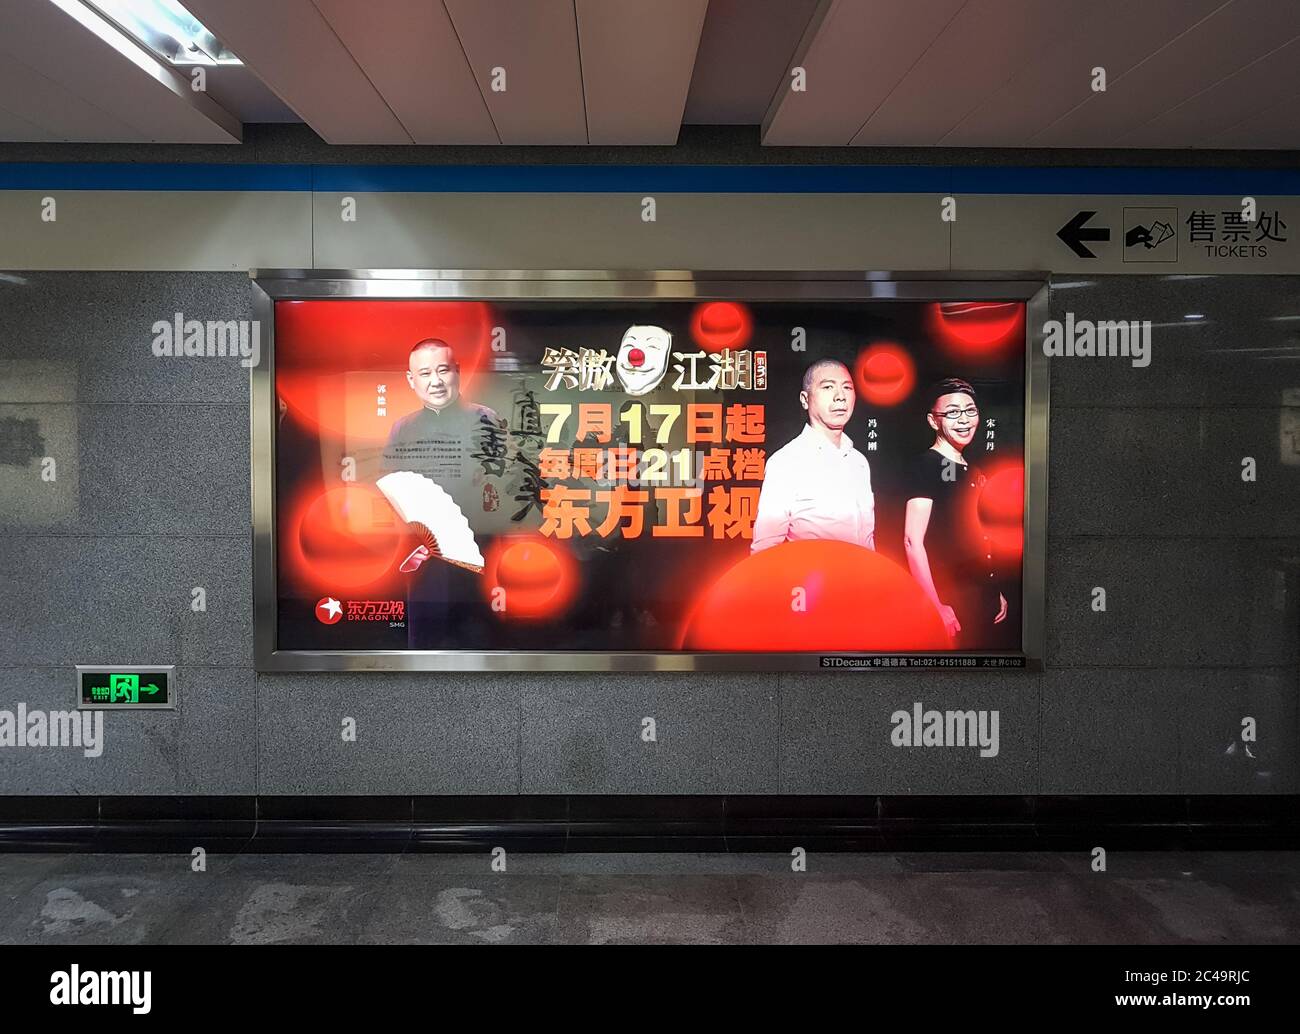 Shanghai, China - Chinese music variety show commercial billboard in subway station. Metro station of metropolitan city. Broadcasting talent show. Stock Photo